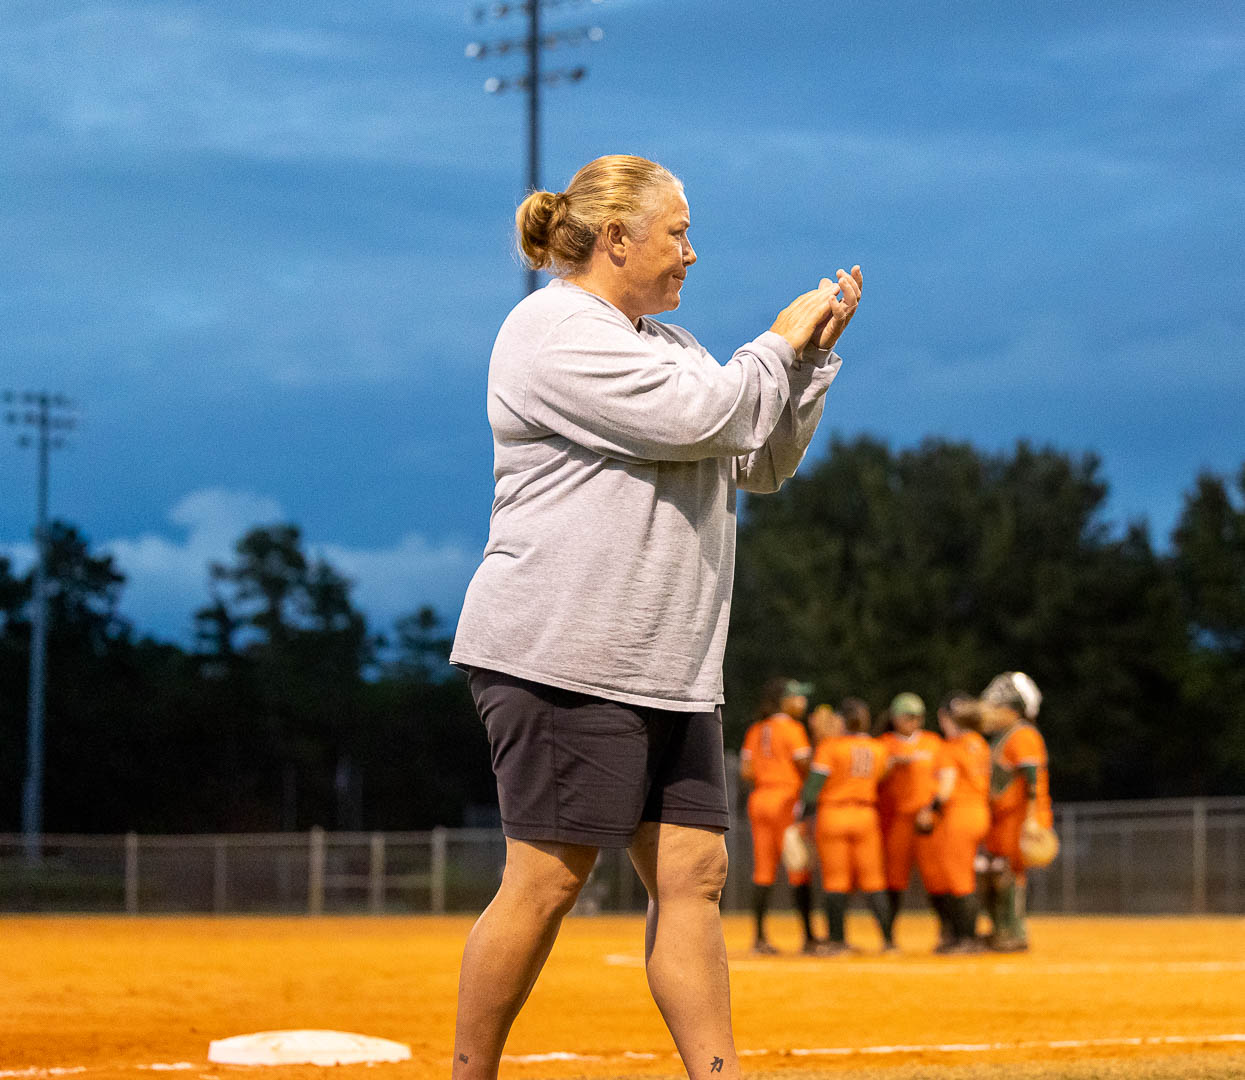 Dugout Talks: Discussing conference play with TCC Softball head coach Patti Townsend